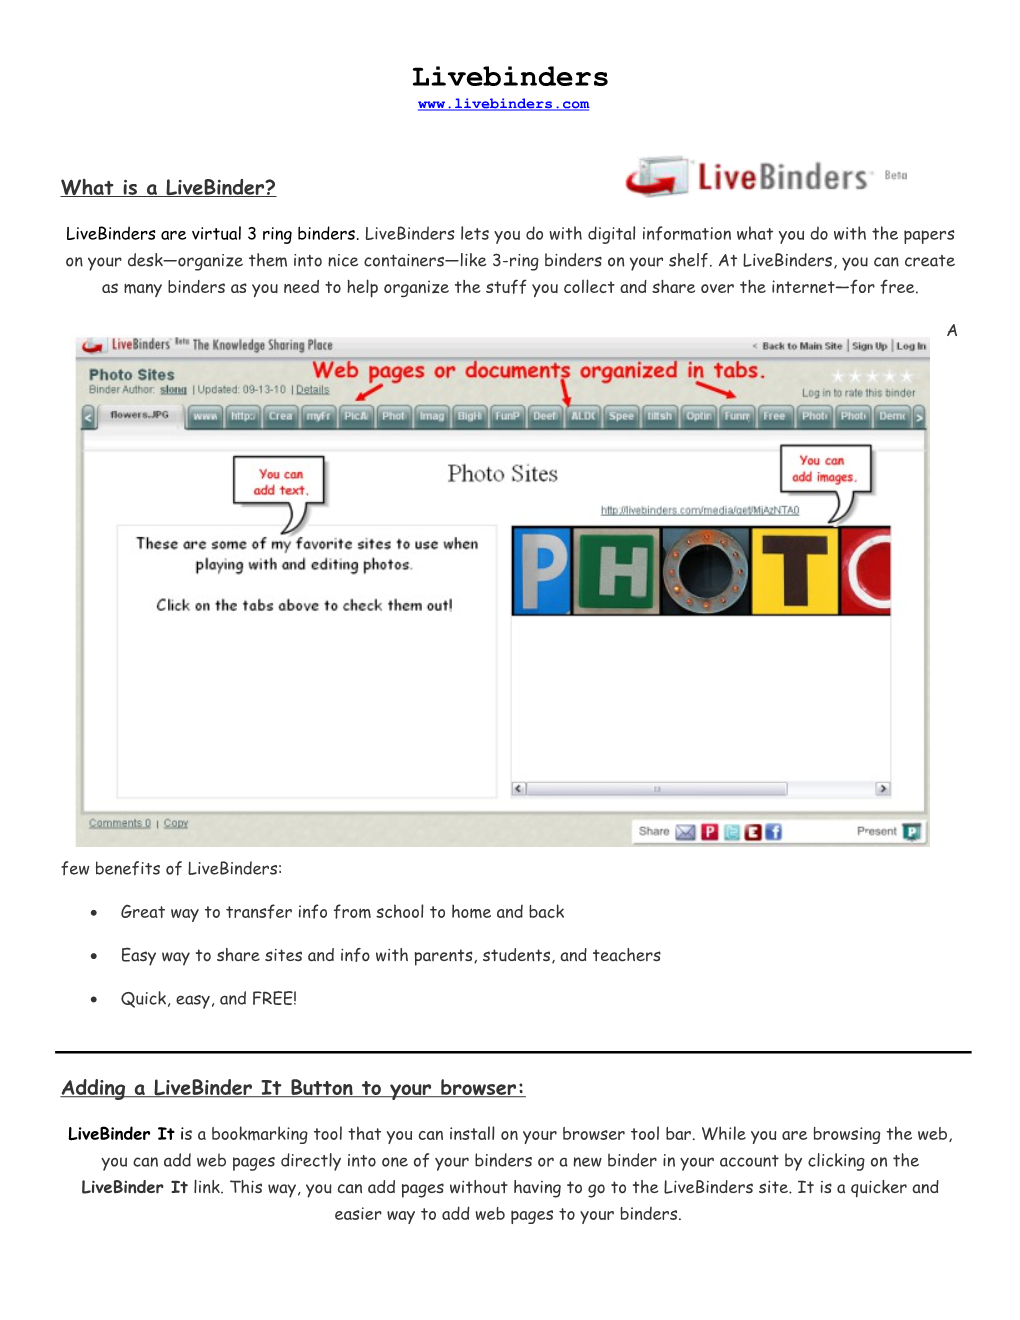 What Is a Livebinder?